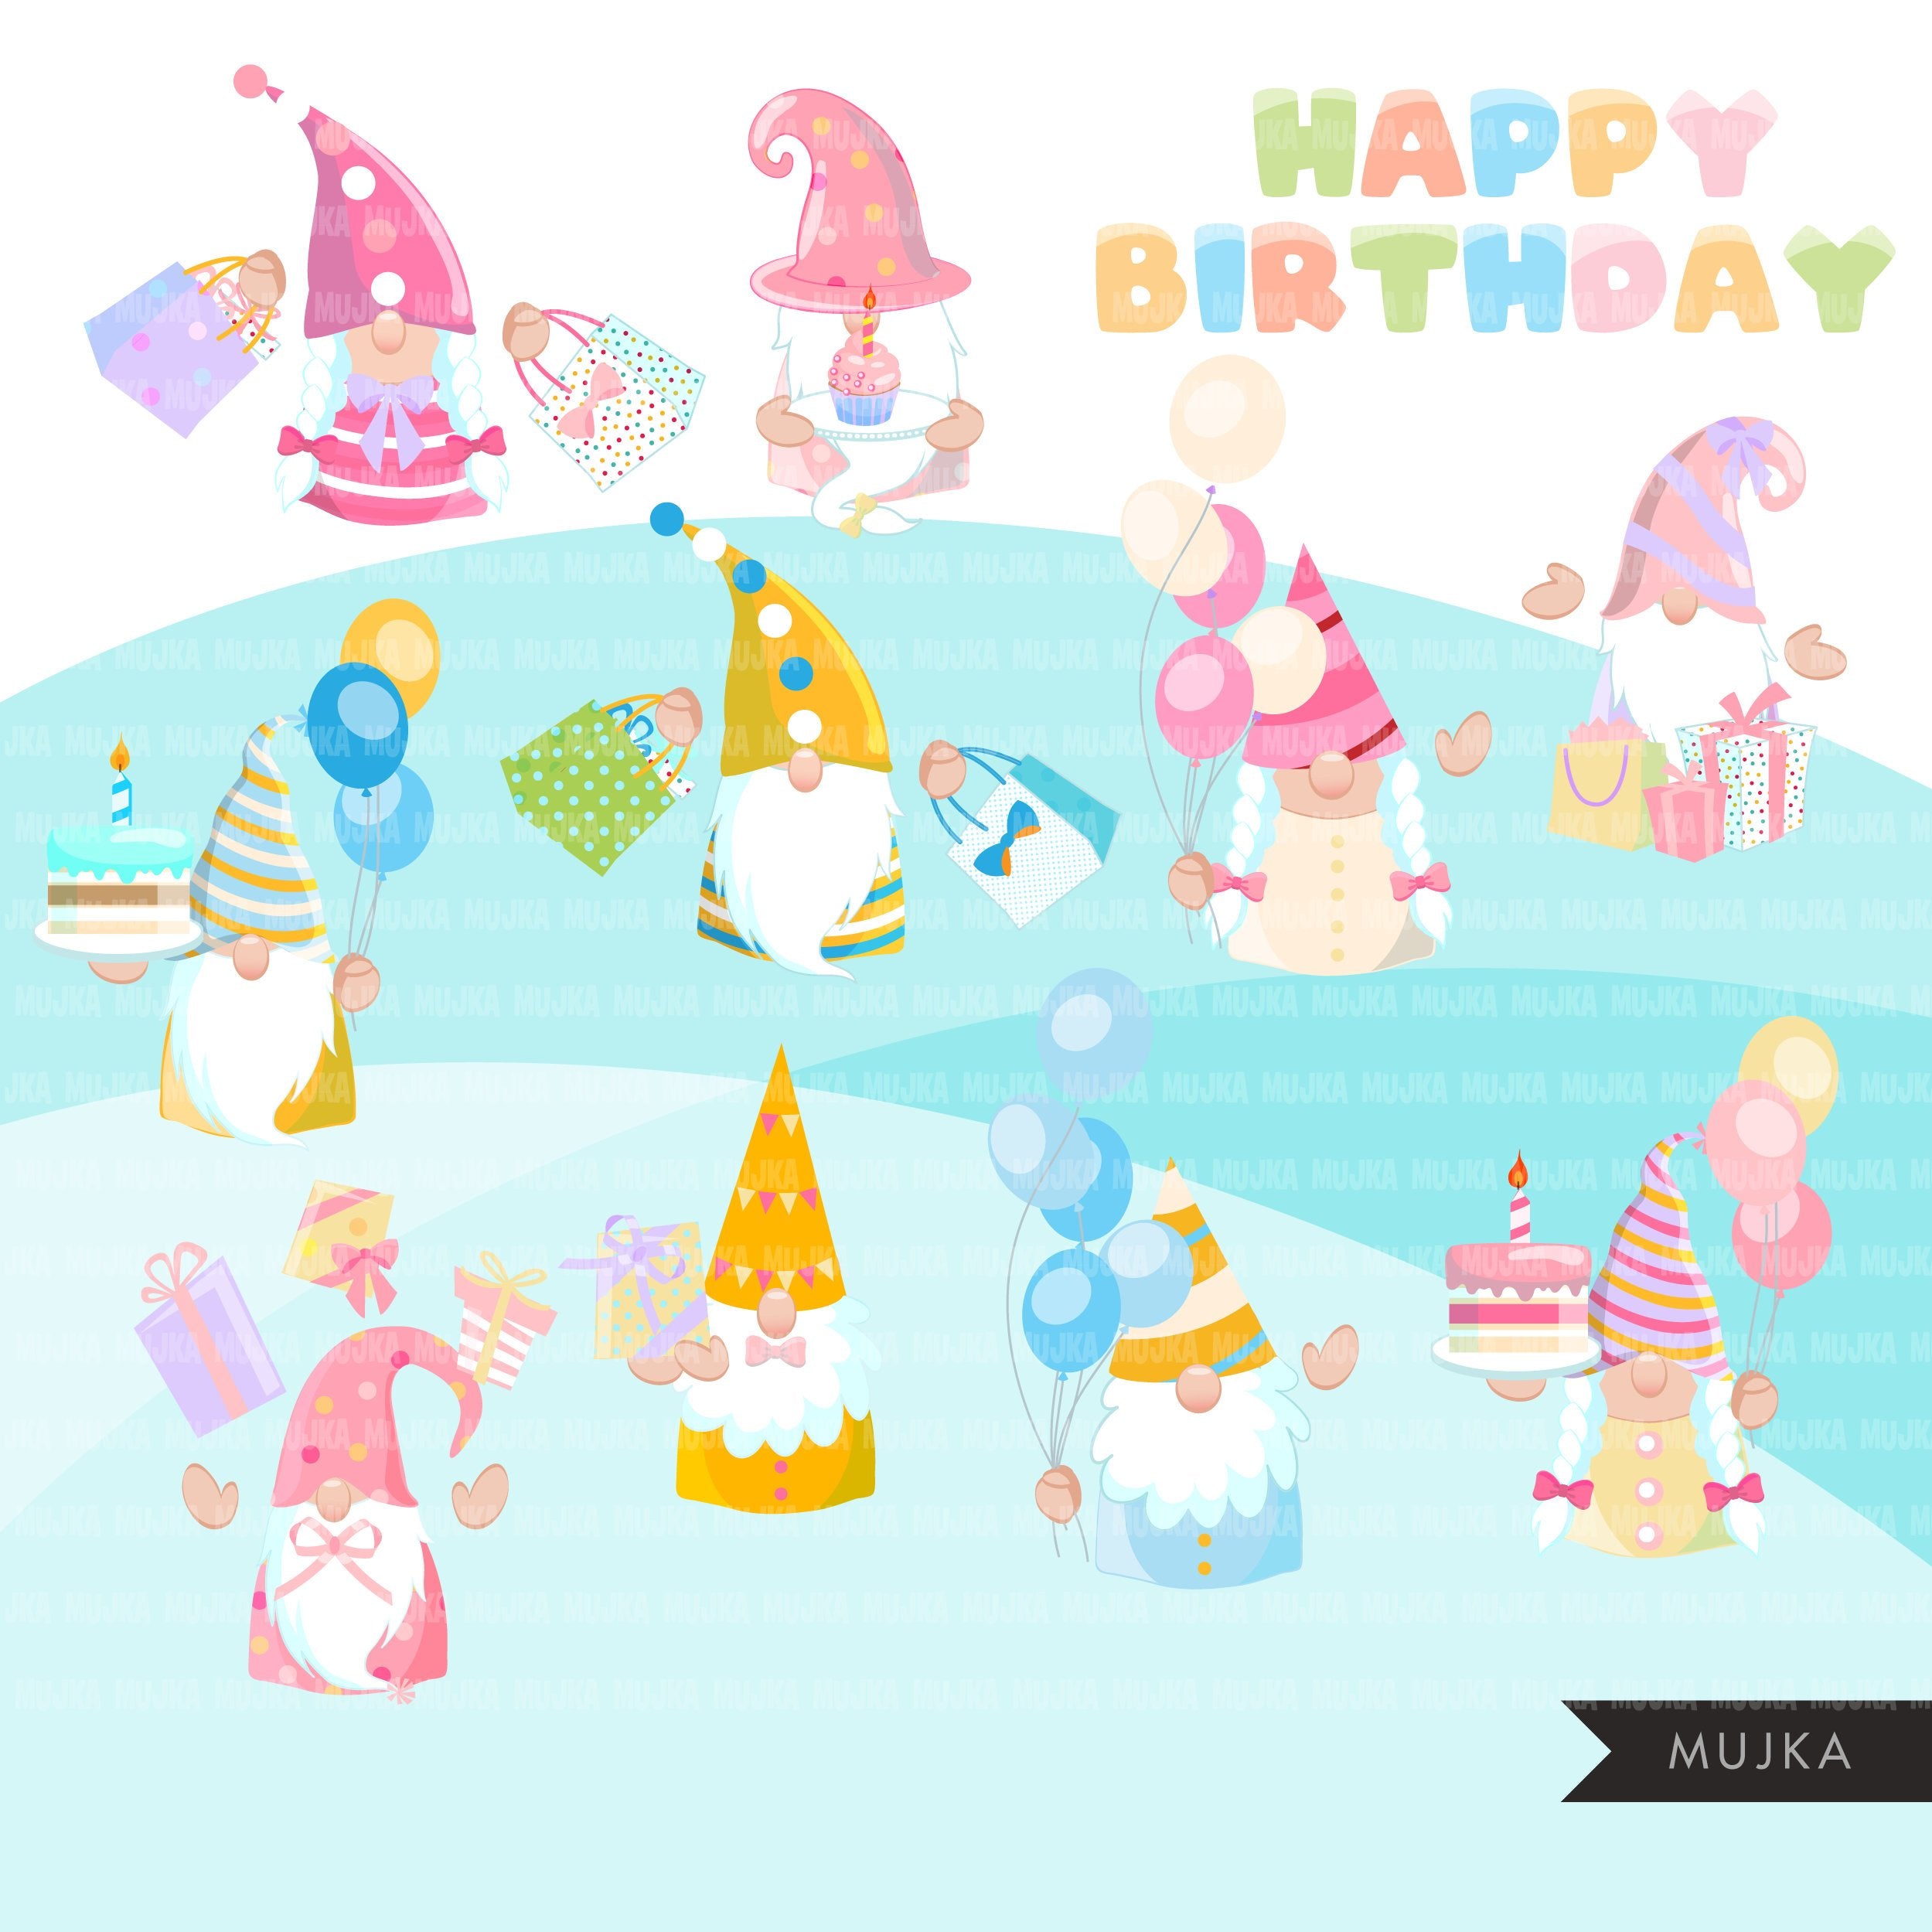 Birthday Gnome Clipart Printable Stickers for Digital Planners